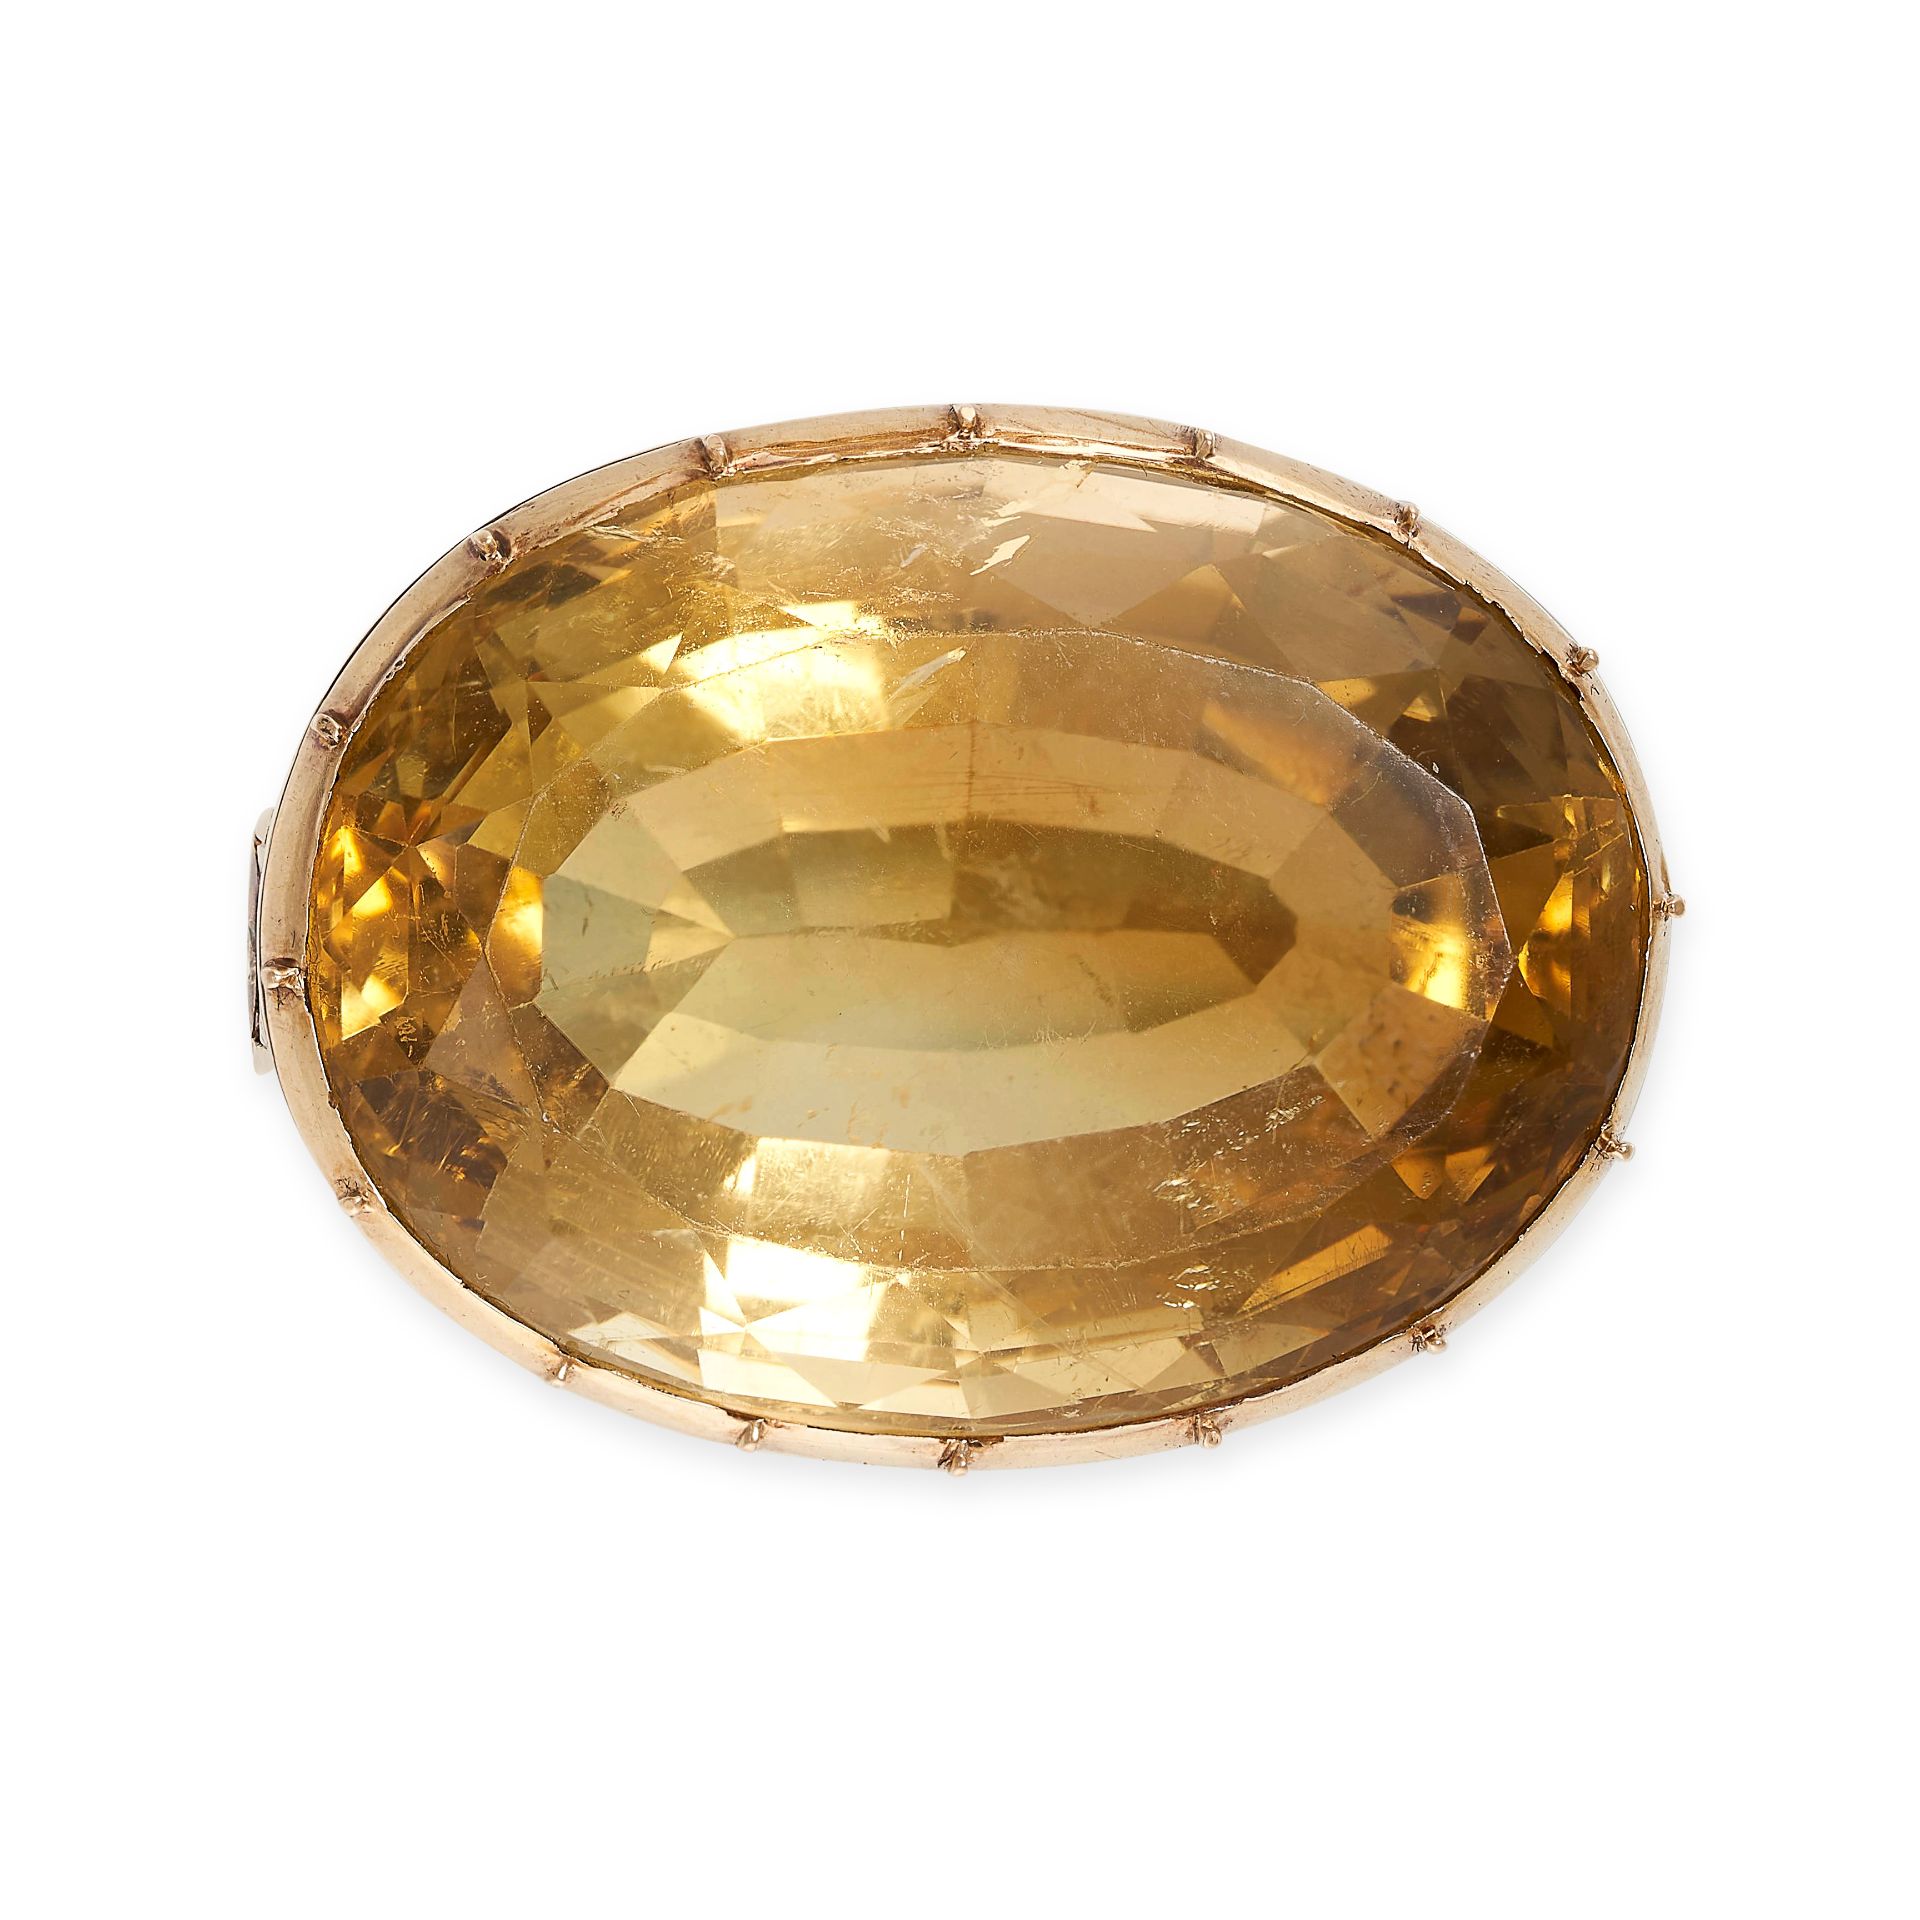 AN ANTIQUE CITRINE BROOCH in 18ct yellow gold, set with a large oval cut citrine in a pinched collet